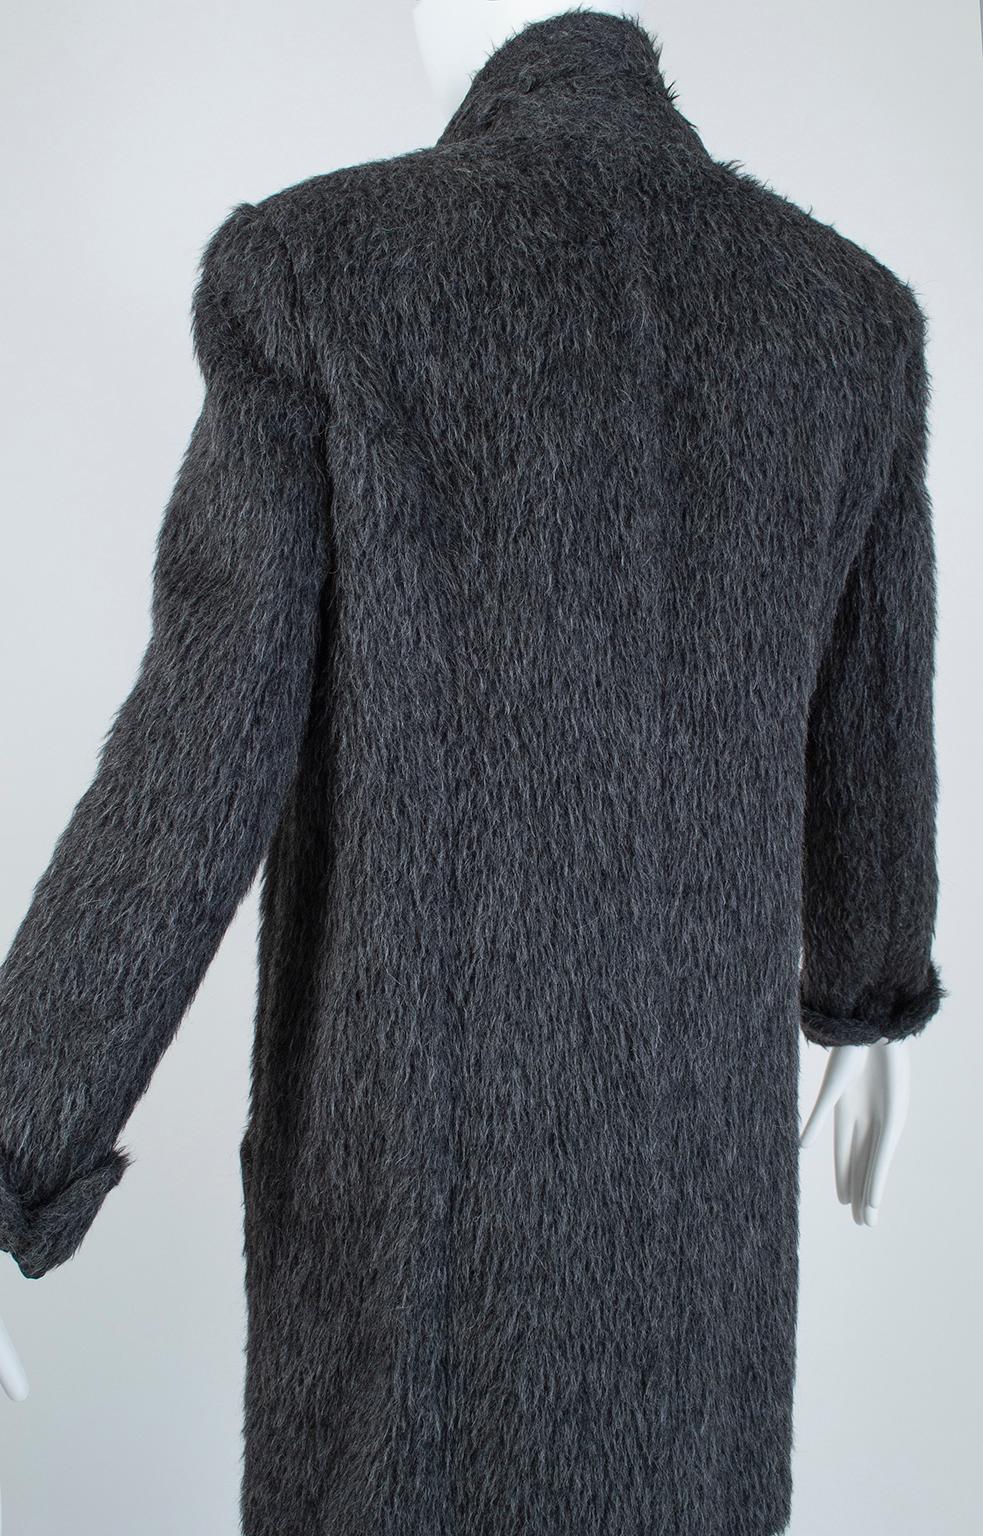 Women's Donna Karan Charcoal Gray Teddy Bear Cashmere and Alpaca Pant Suit - M, 1990s For Sale